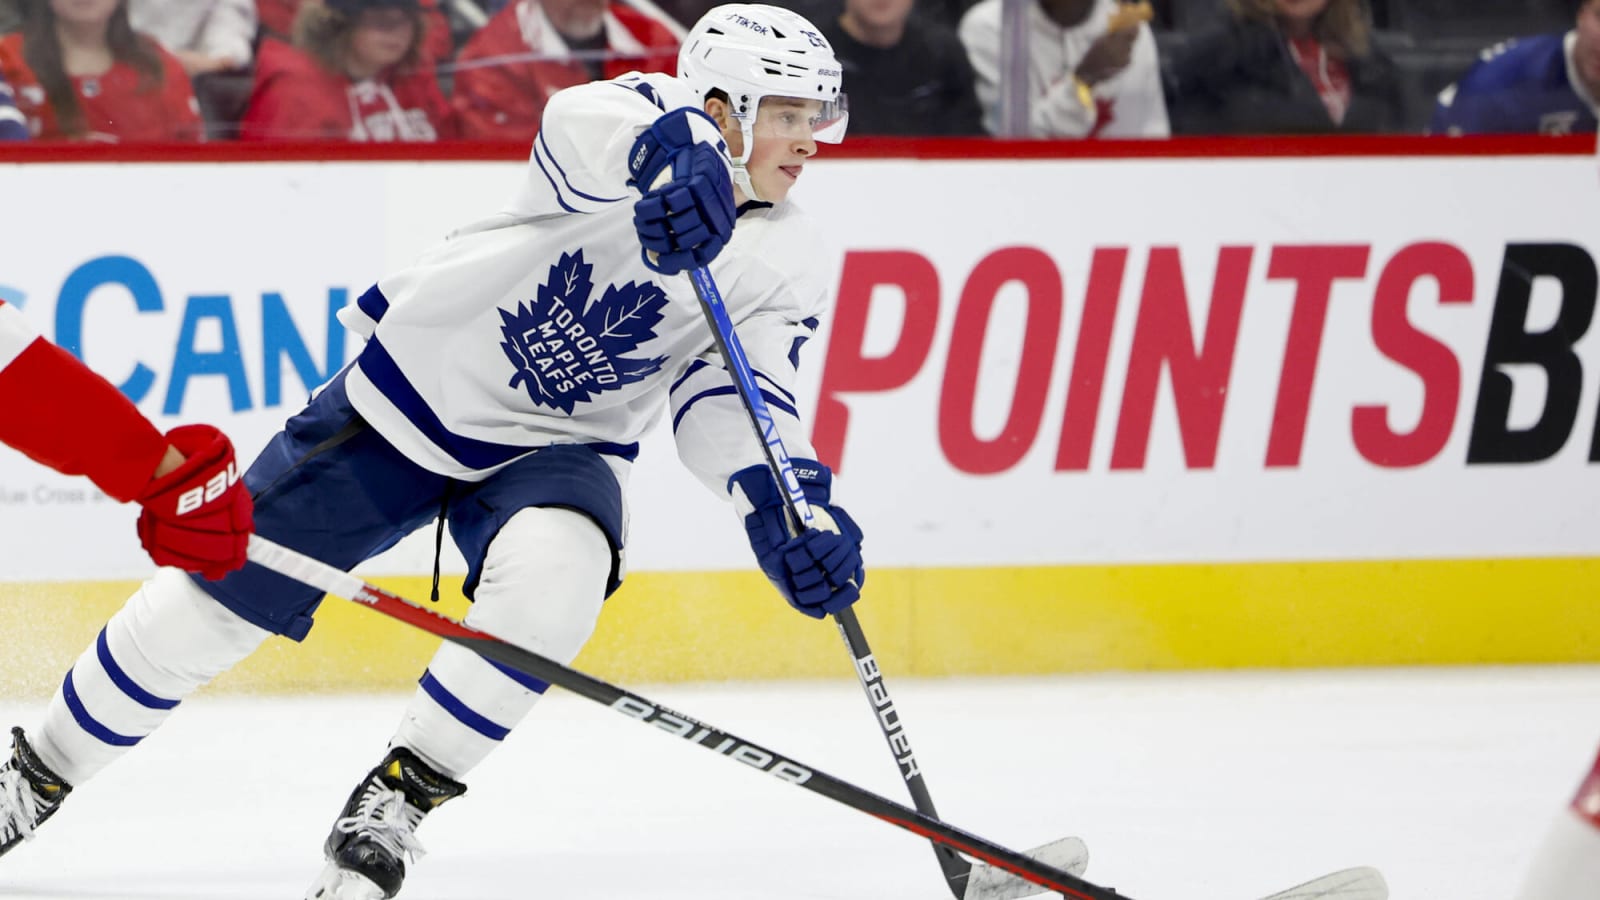 Maple Leafs sign forward Nicholas Abruzzese to two-year, entry